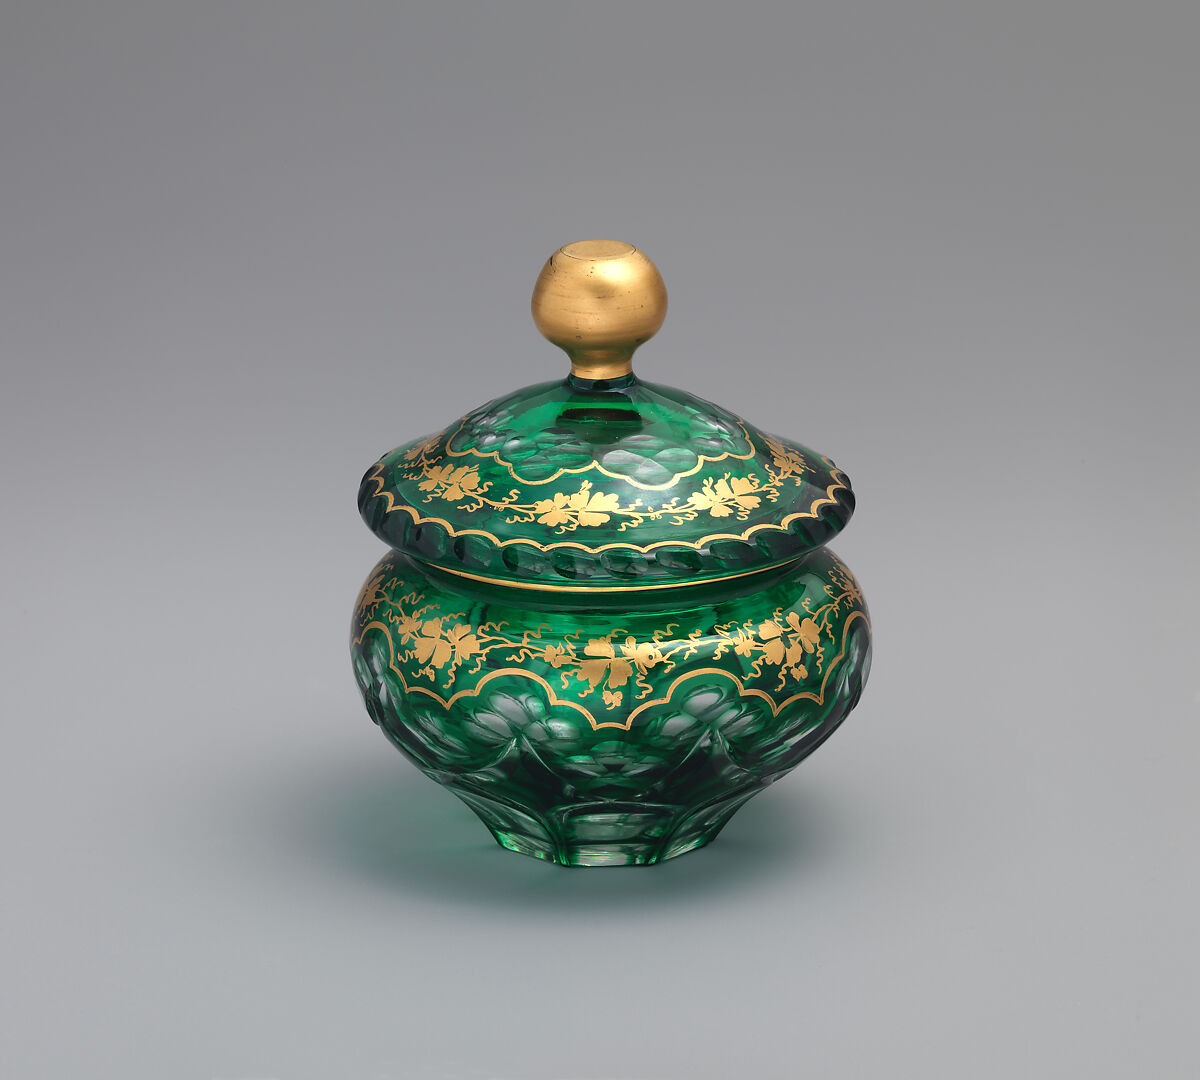 Powder box, New England Glass Company (American, East Cambridge, Massachusetts, 1818–1888), Green cased over colorless lead glass; blown, cut and gilded, American 